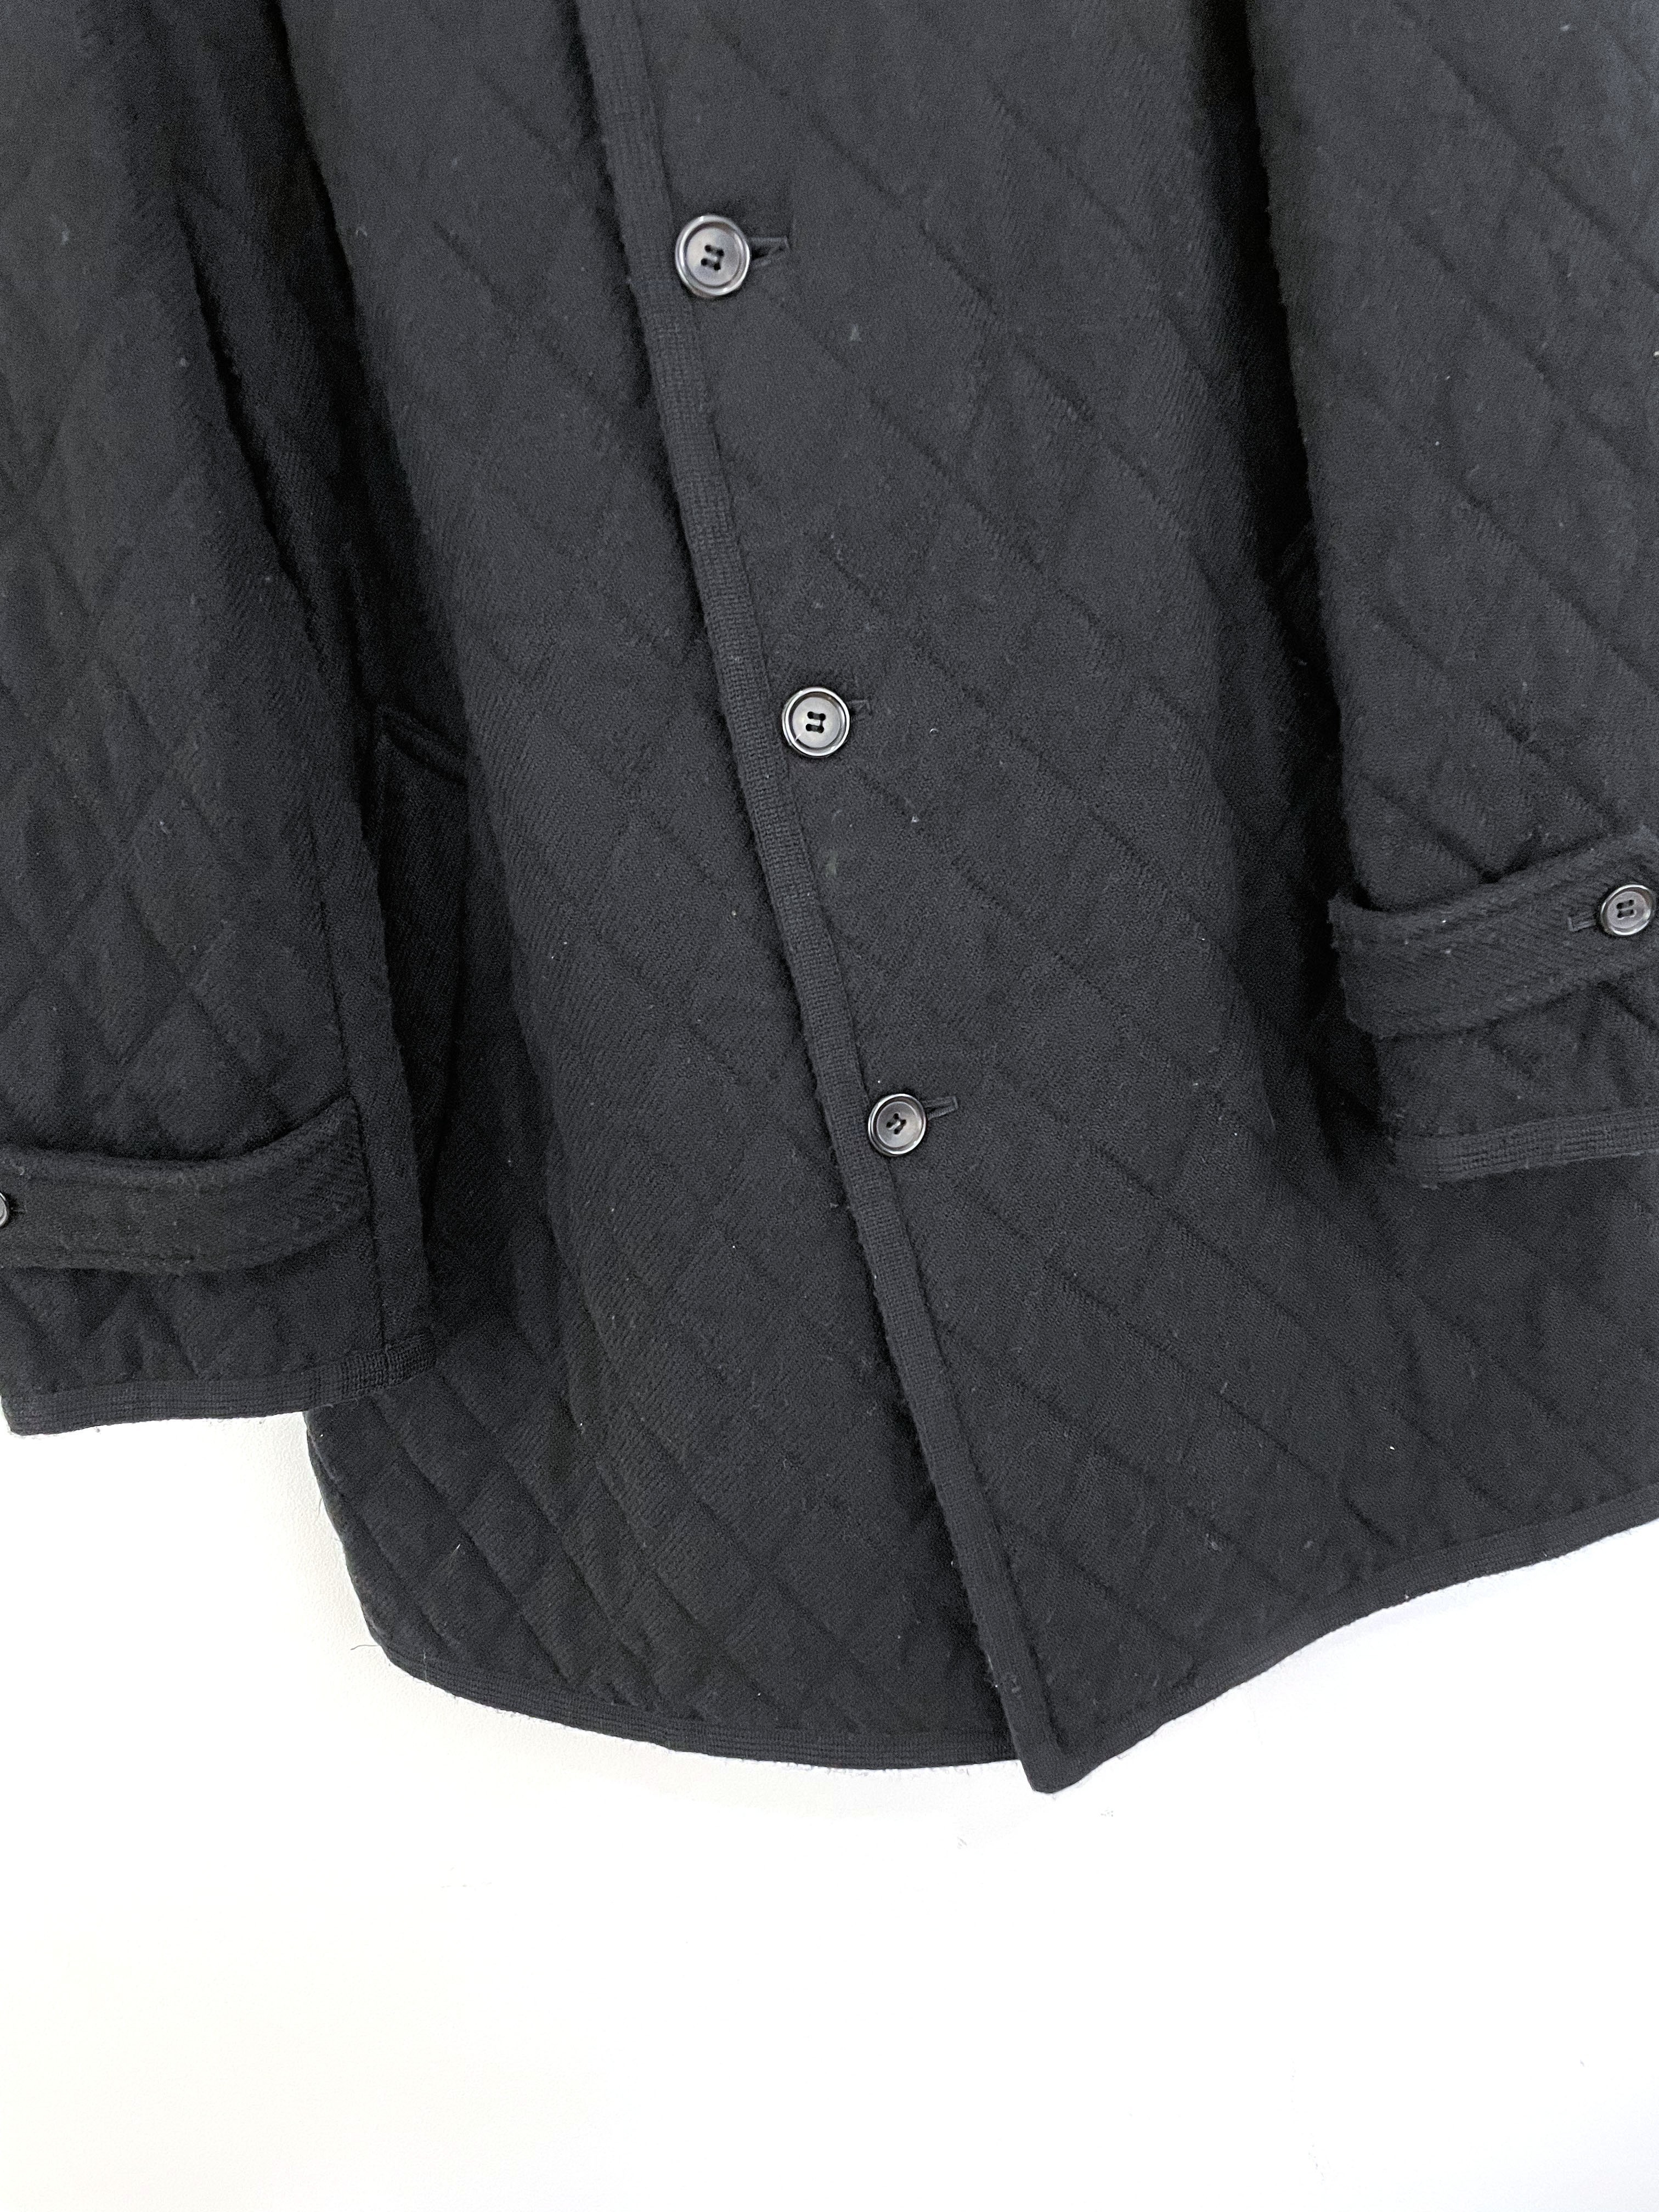 2007 Quilted Coat - 4